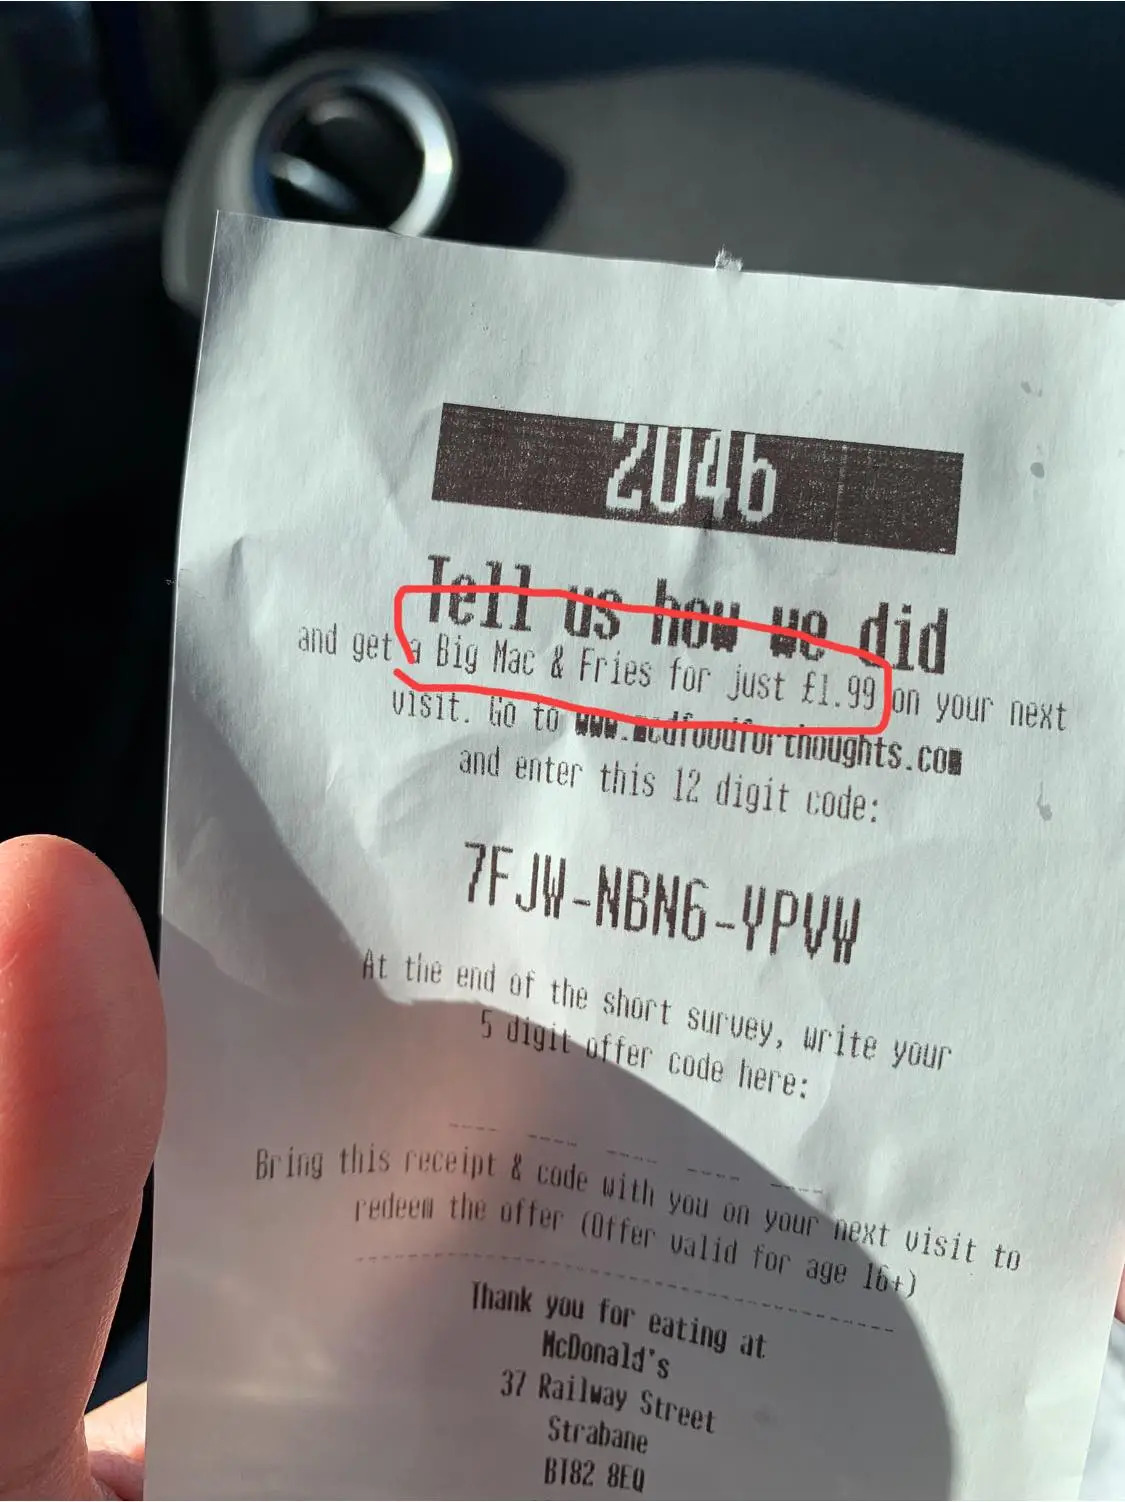 mcdfoodforthoughts.com 12 digit code